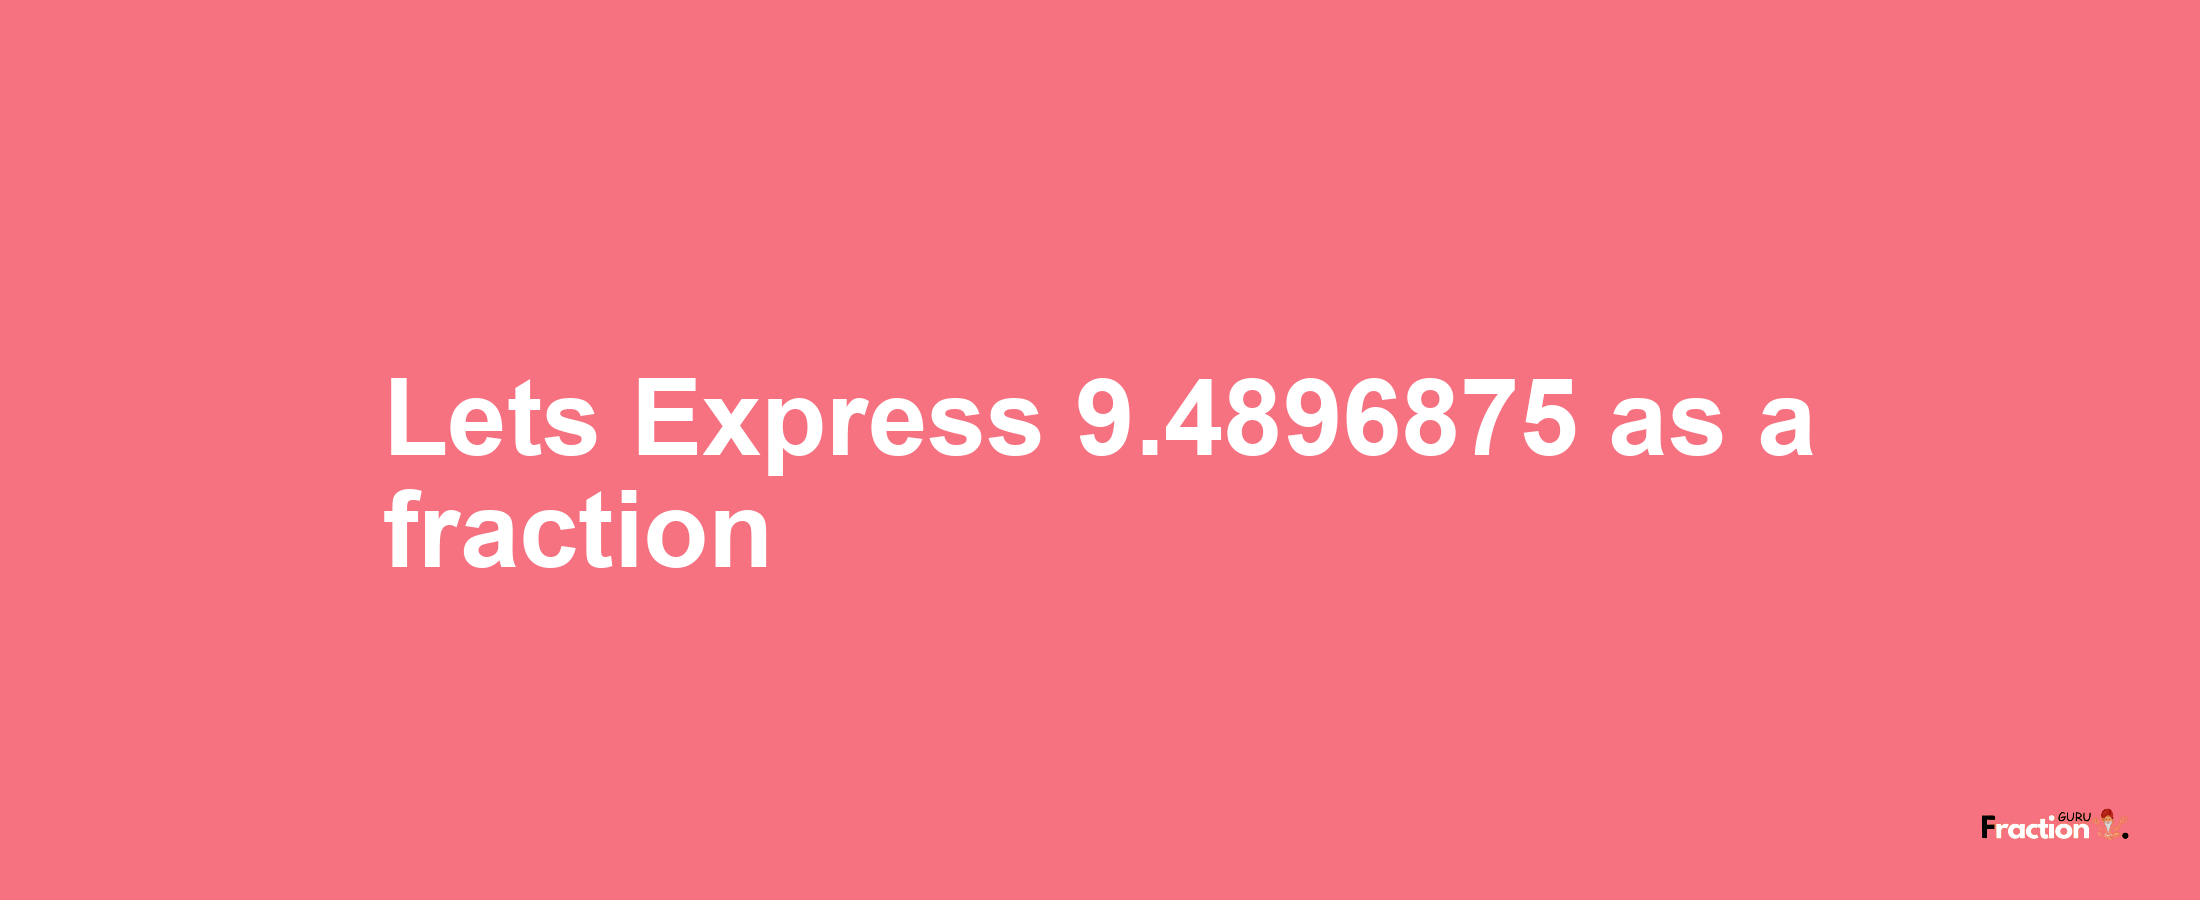 Lets Express 9.4896875 as afraction